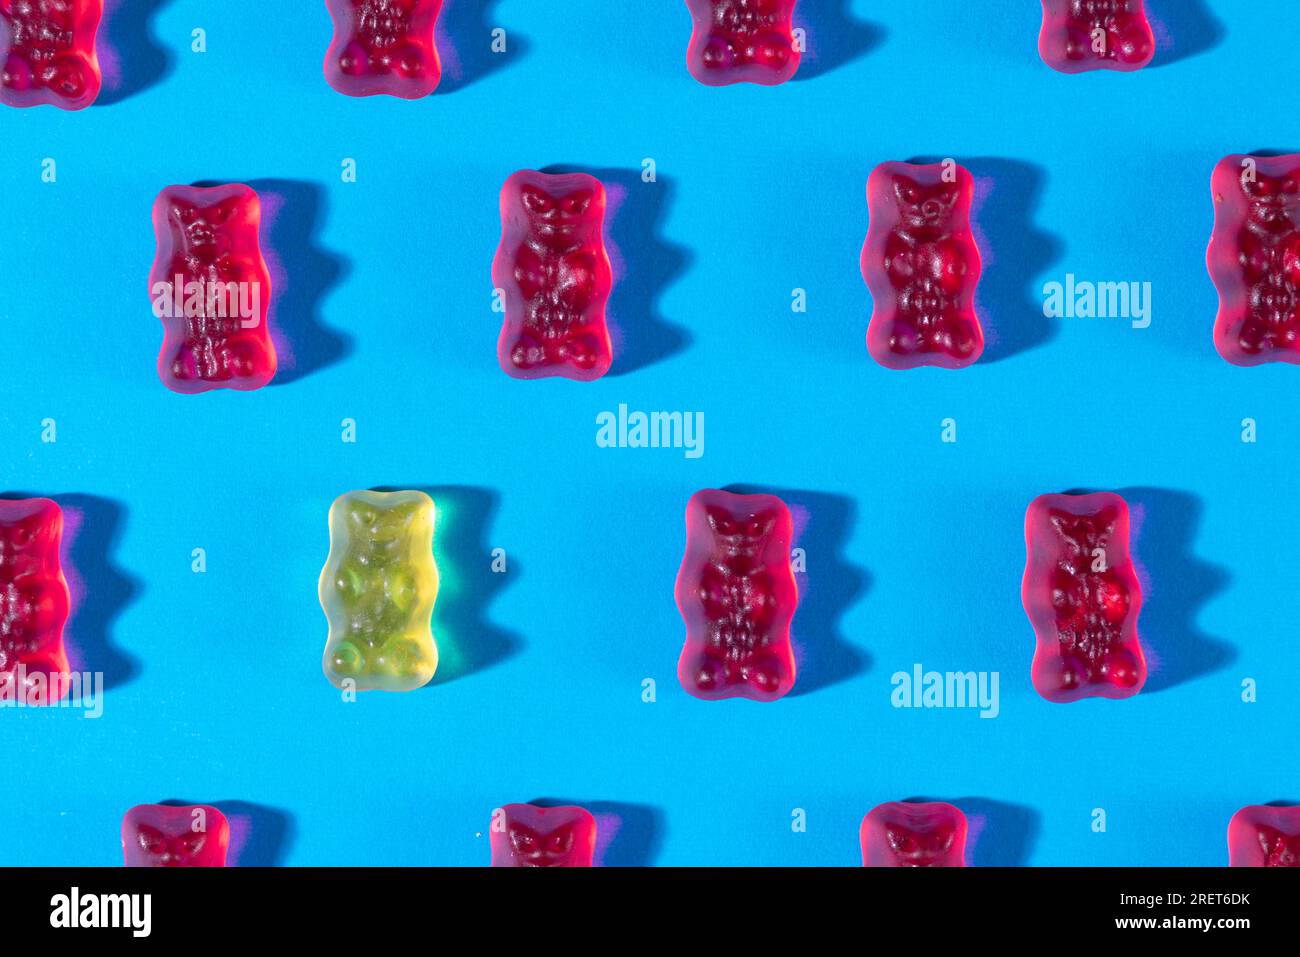 Red gummy bears and a yellow one in rows, on a blue background Stock Photo